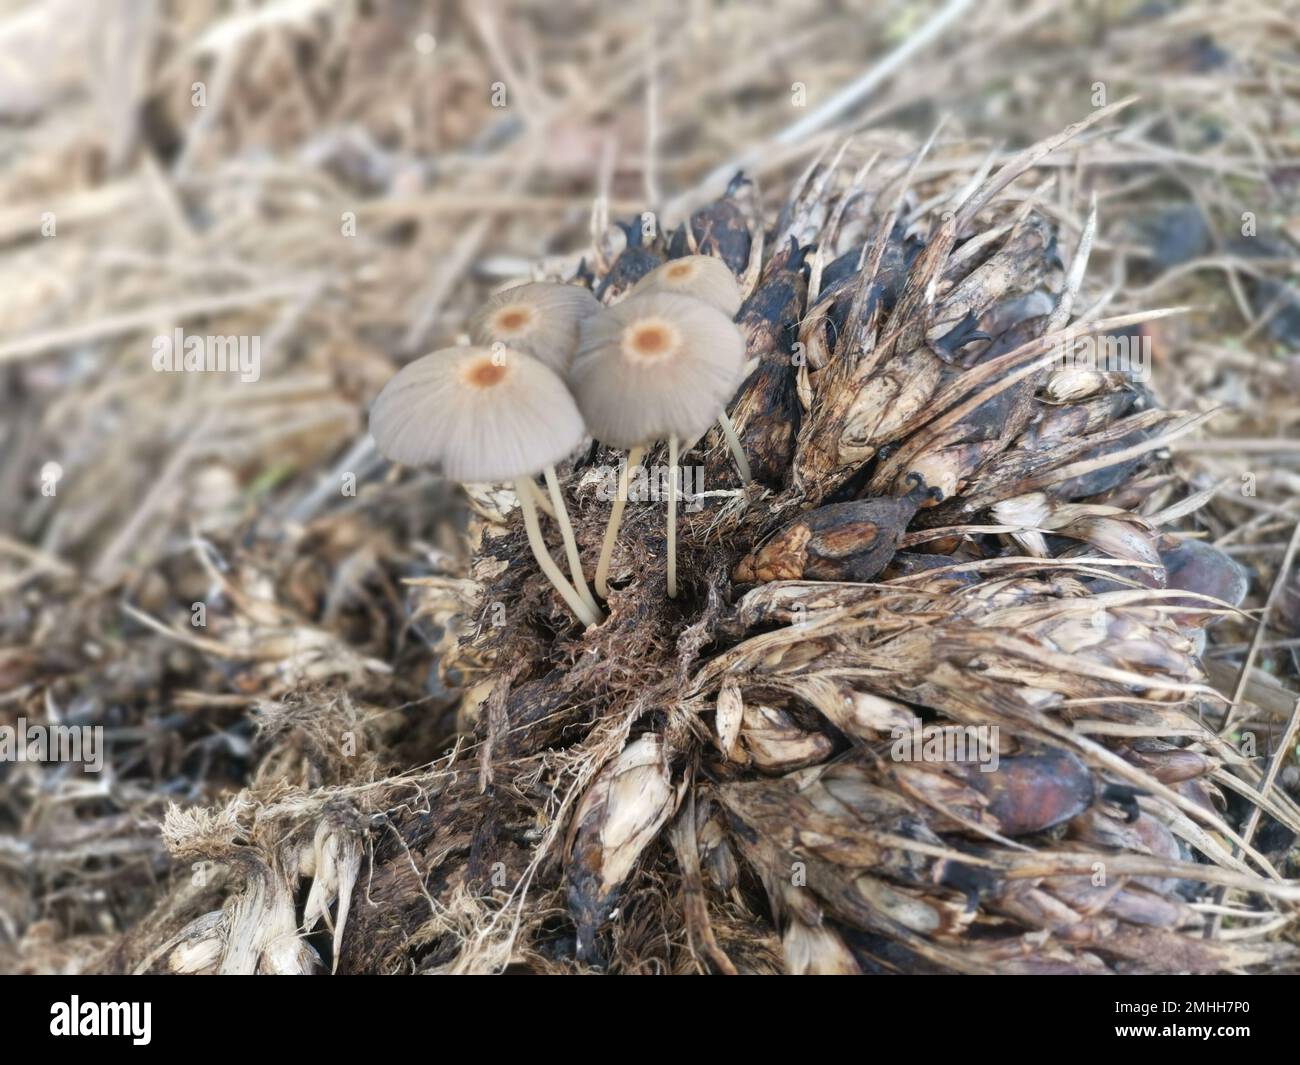 psathyrellaceae mushrooms sprouting out from the cluster of oil palm fruit Stock Photo